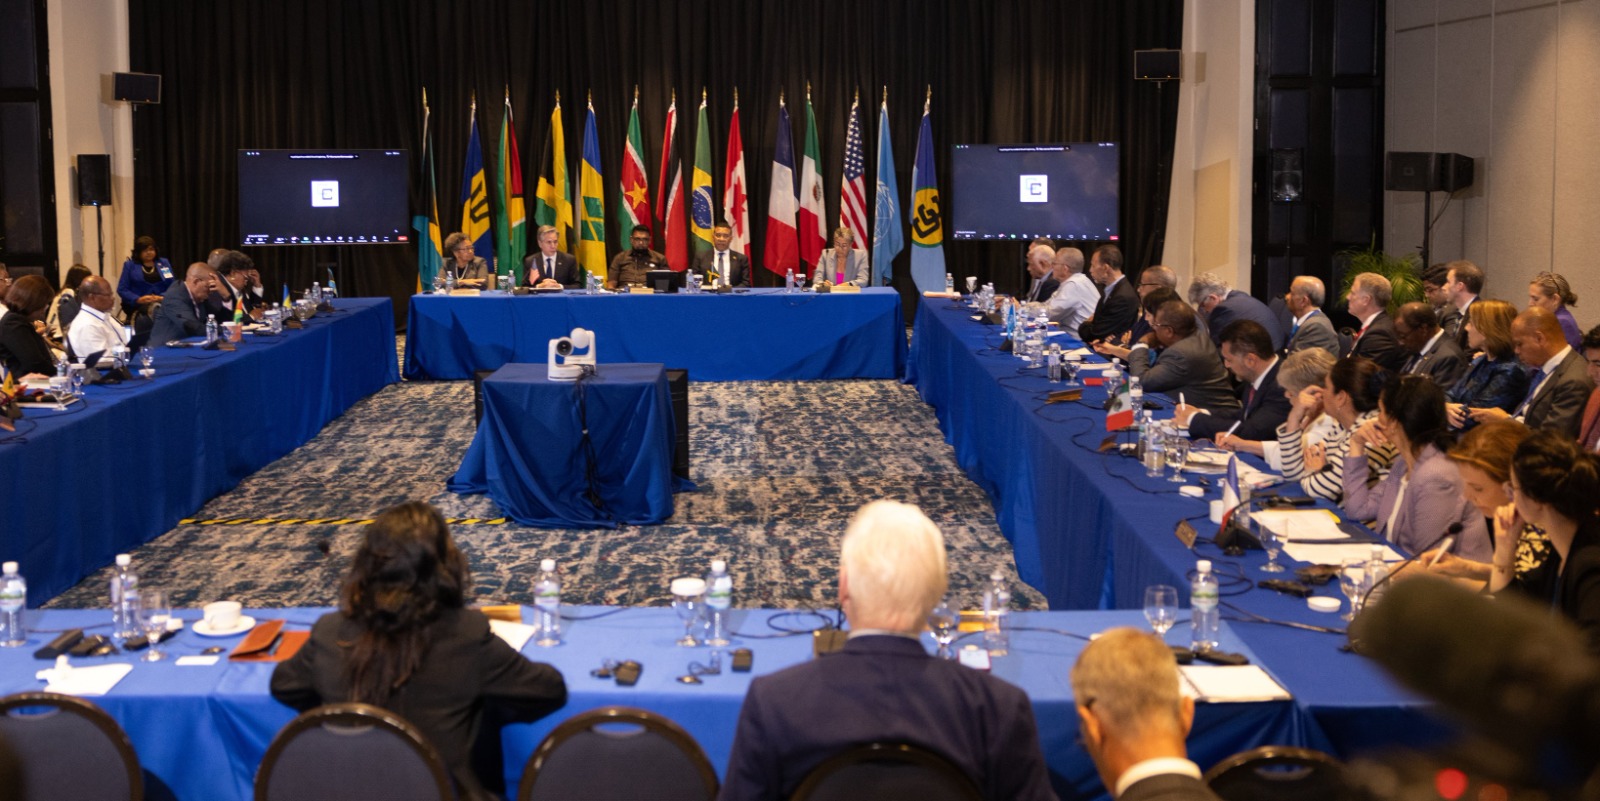 Participants in the emergency meeting on the crisis in Haiti at CARICOM.  Photo credit: US Department of State